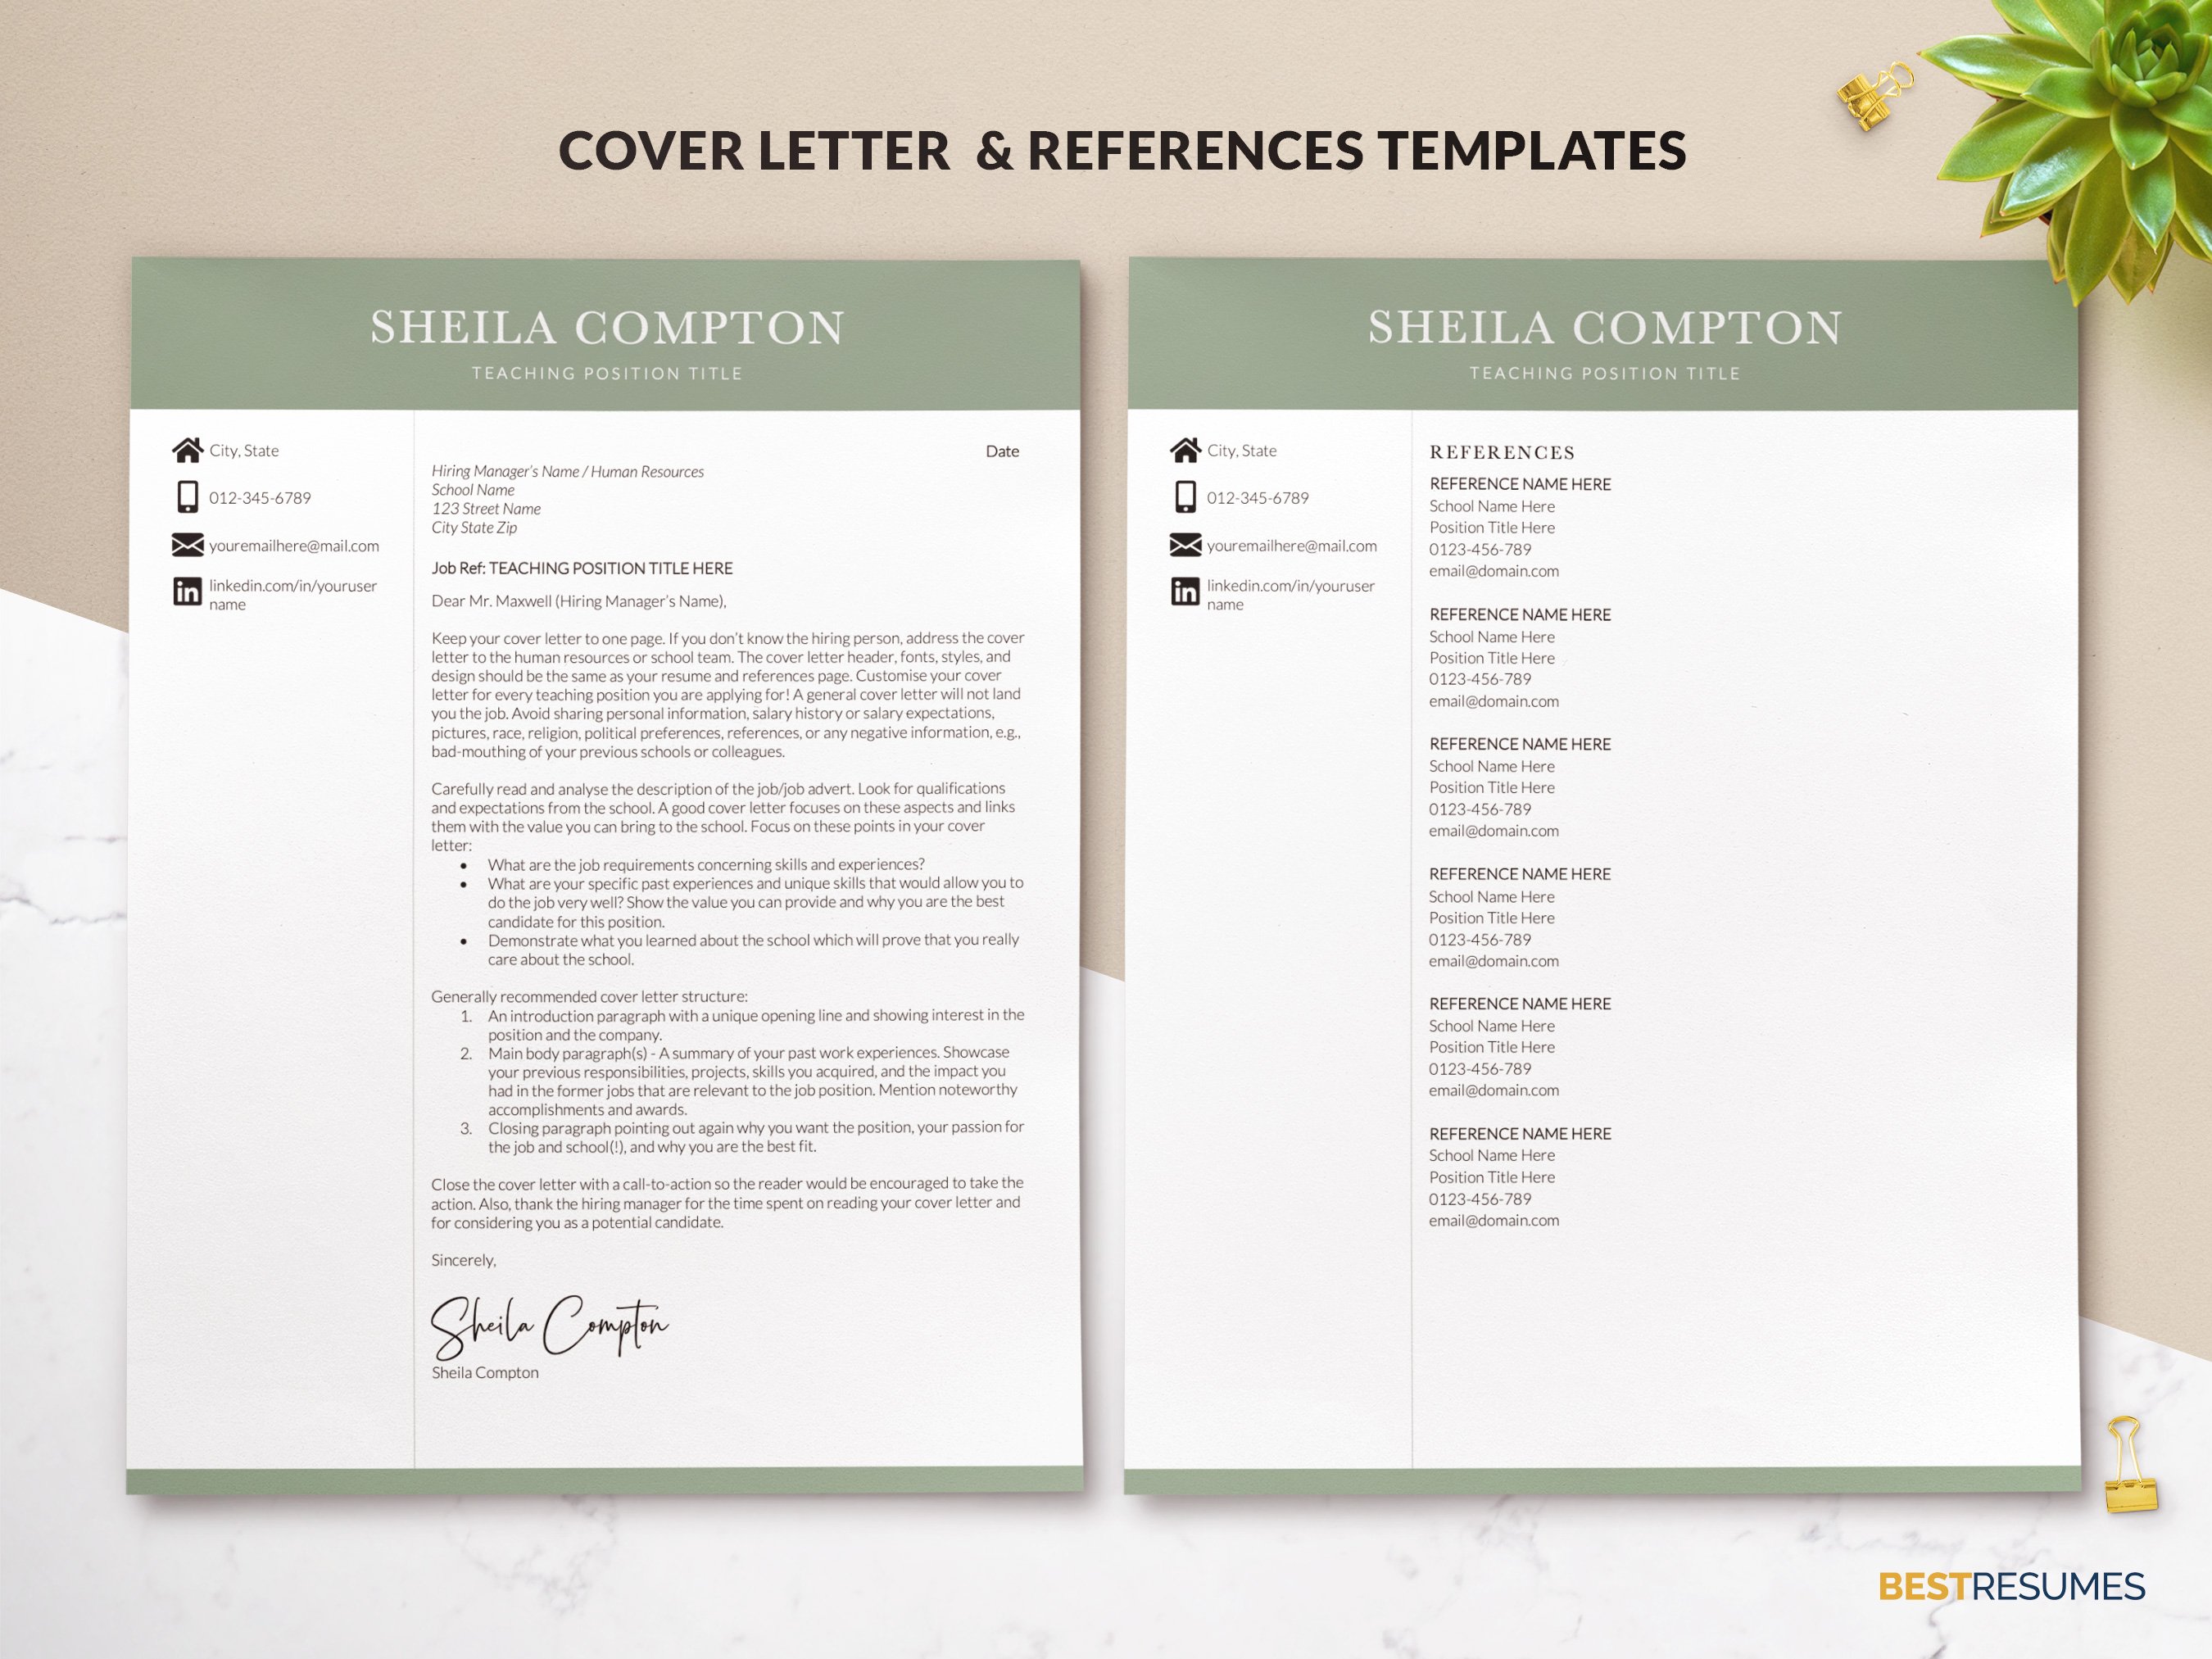 teaching resume template cover letter references page sheila compton 426